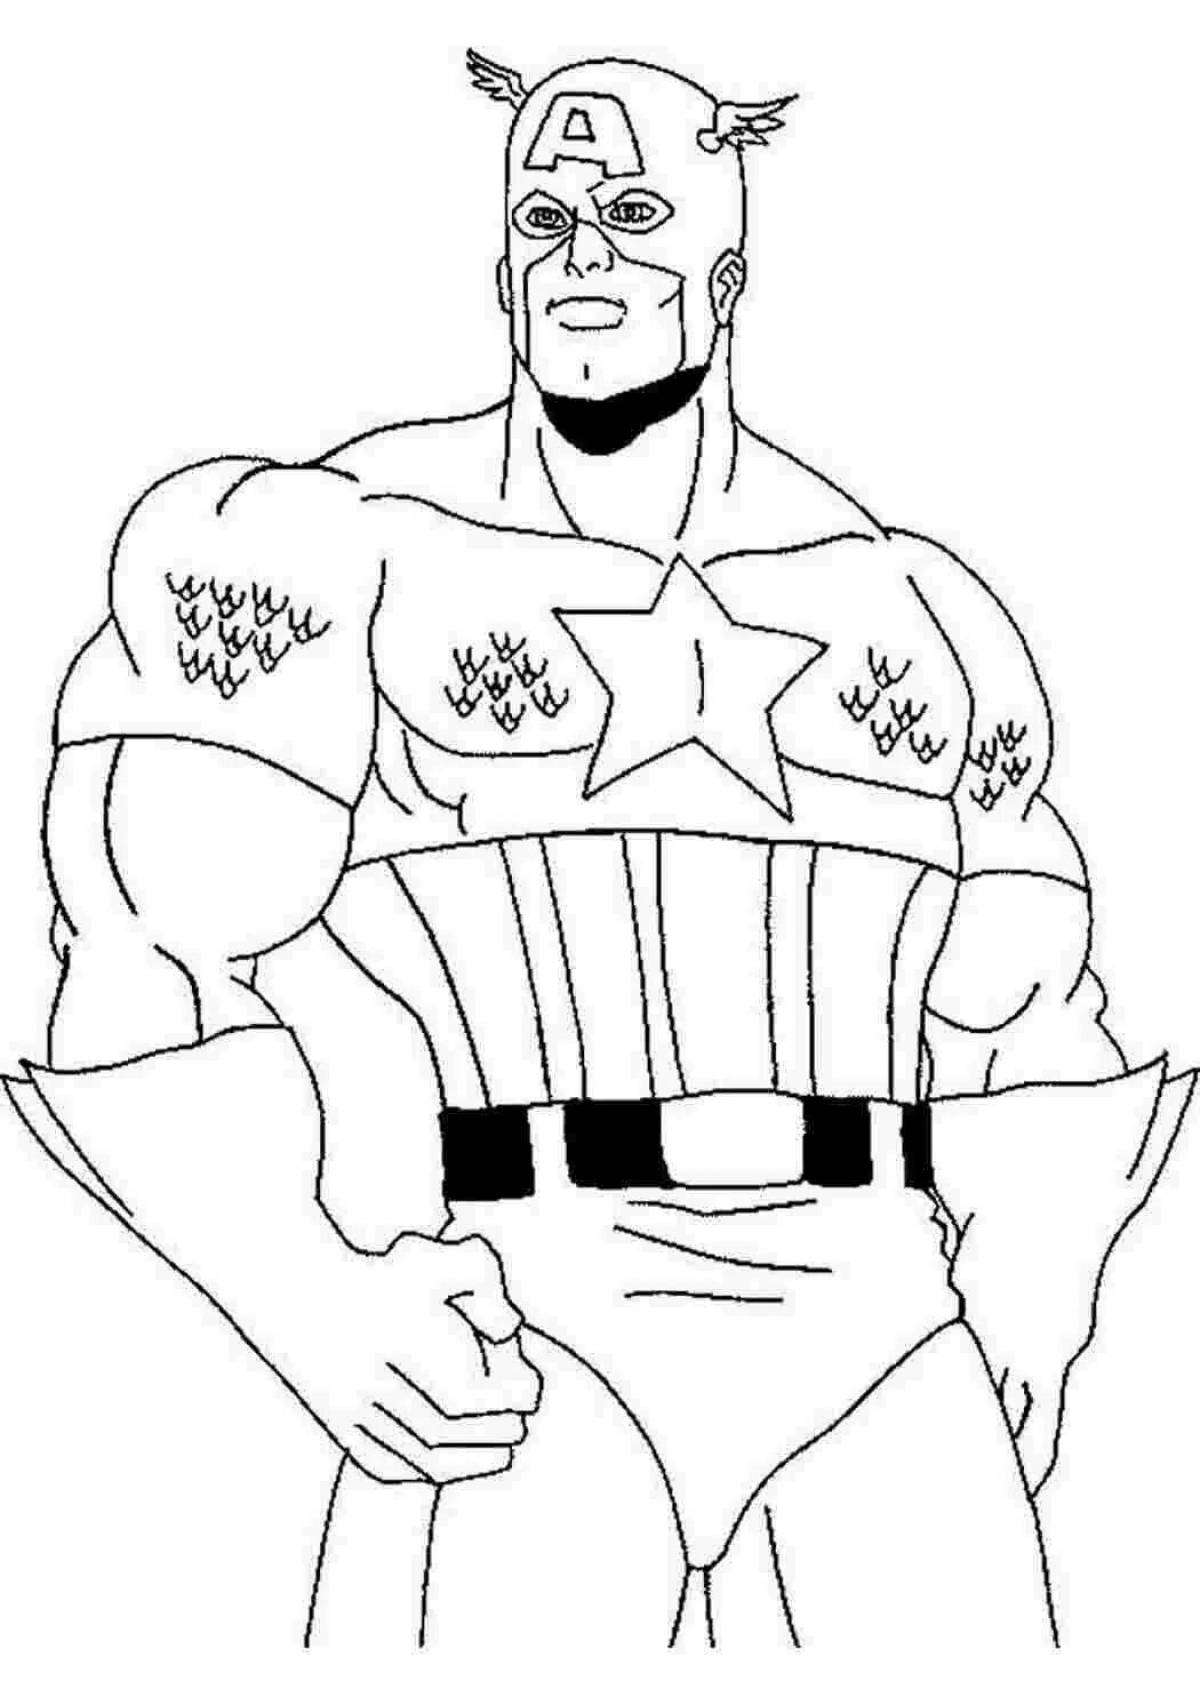 Joyful captain america coloring pages for boys